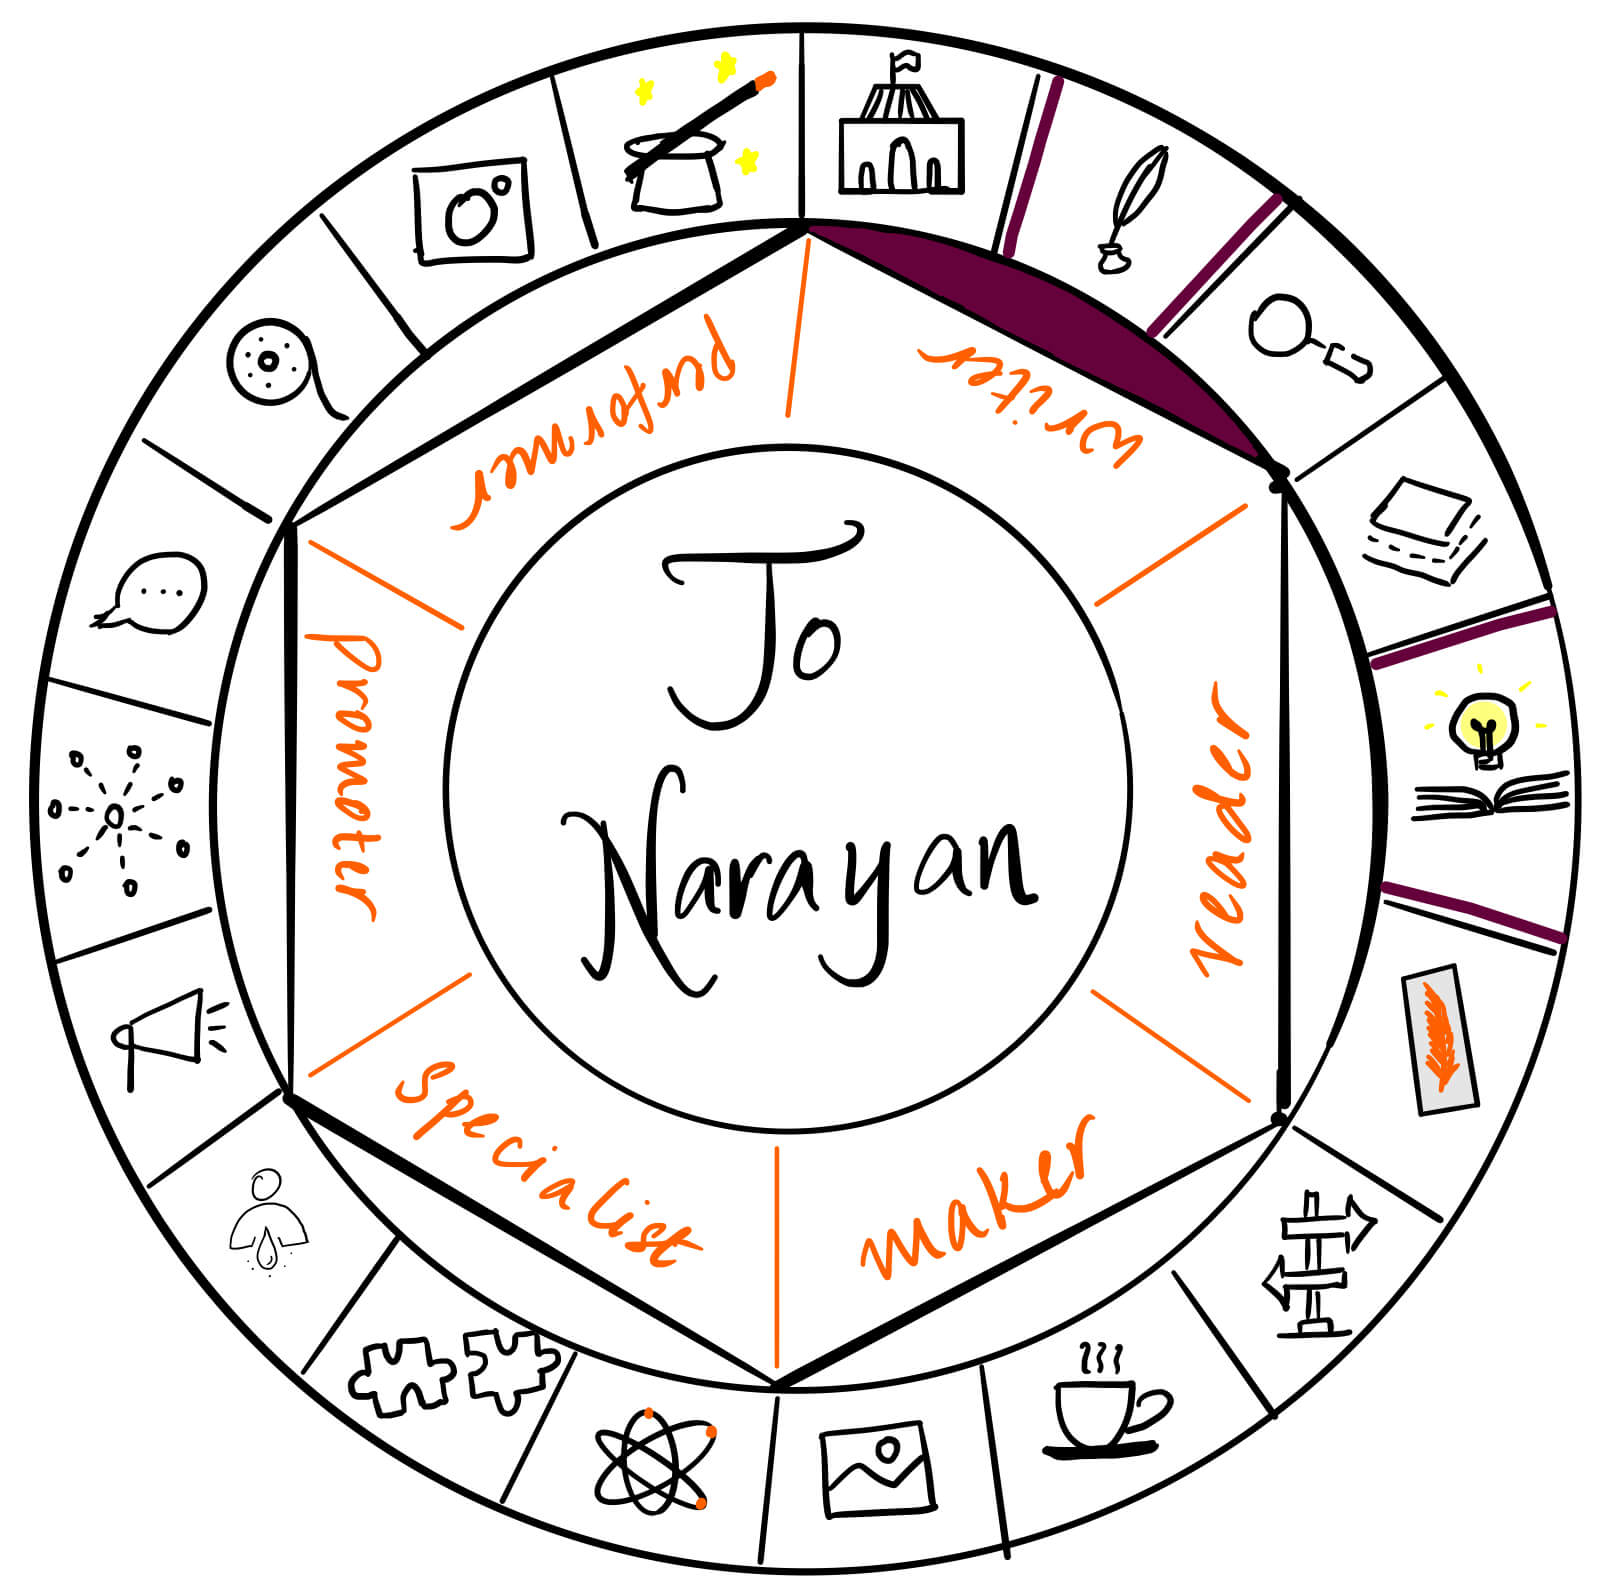 Jo Narayan is a writer. It's a pleasure to have her over on The Creator's Roulette to talk about teaching Fantasy.